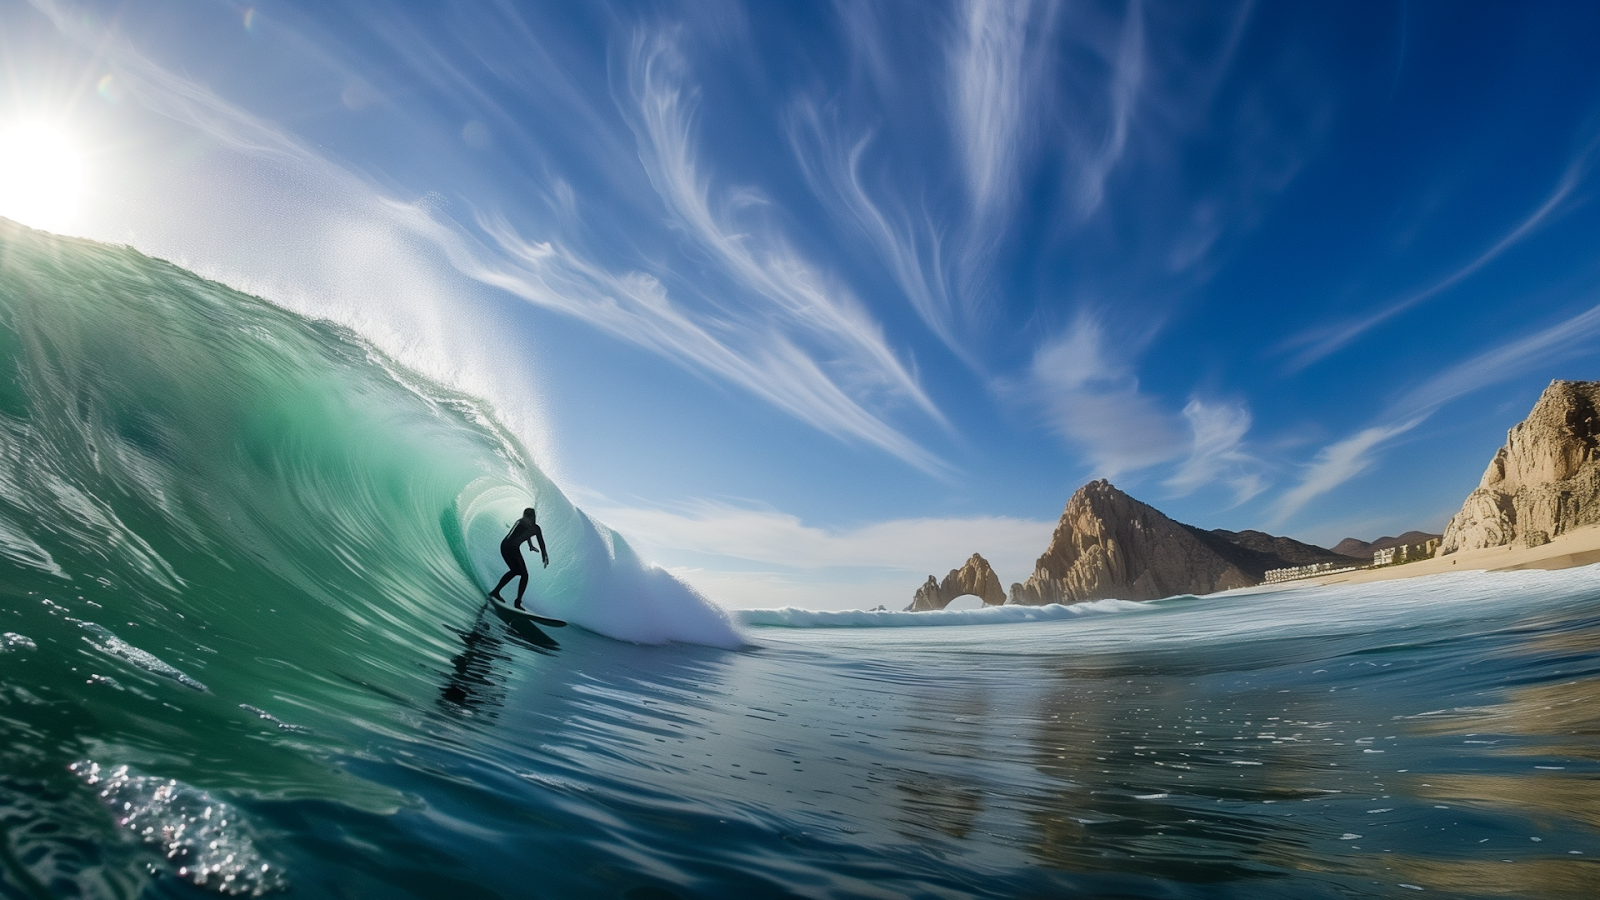 Surfer catching wave at Costa Azul with Arch of Cabo San Lucas in the distance